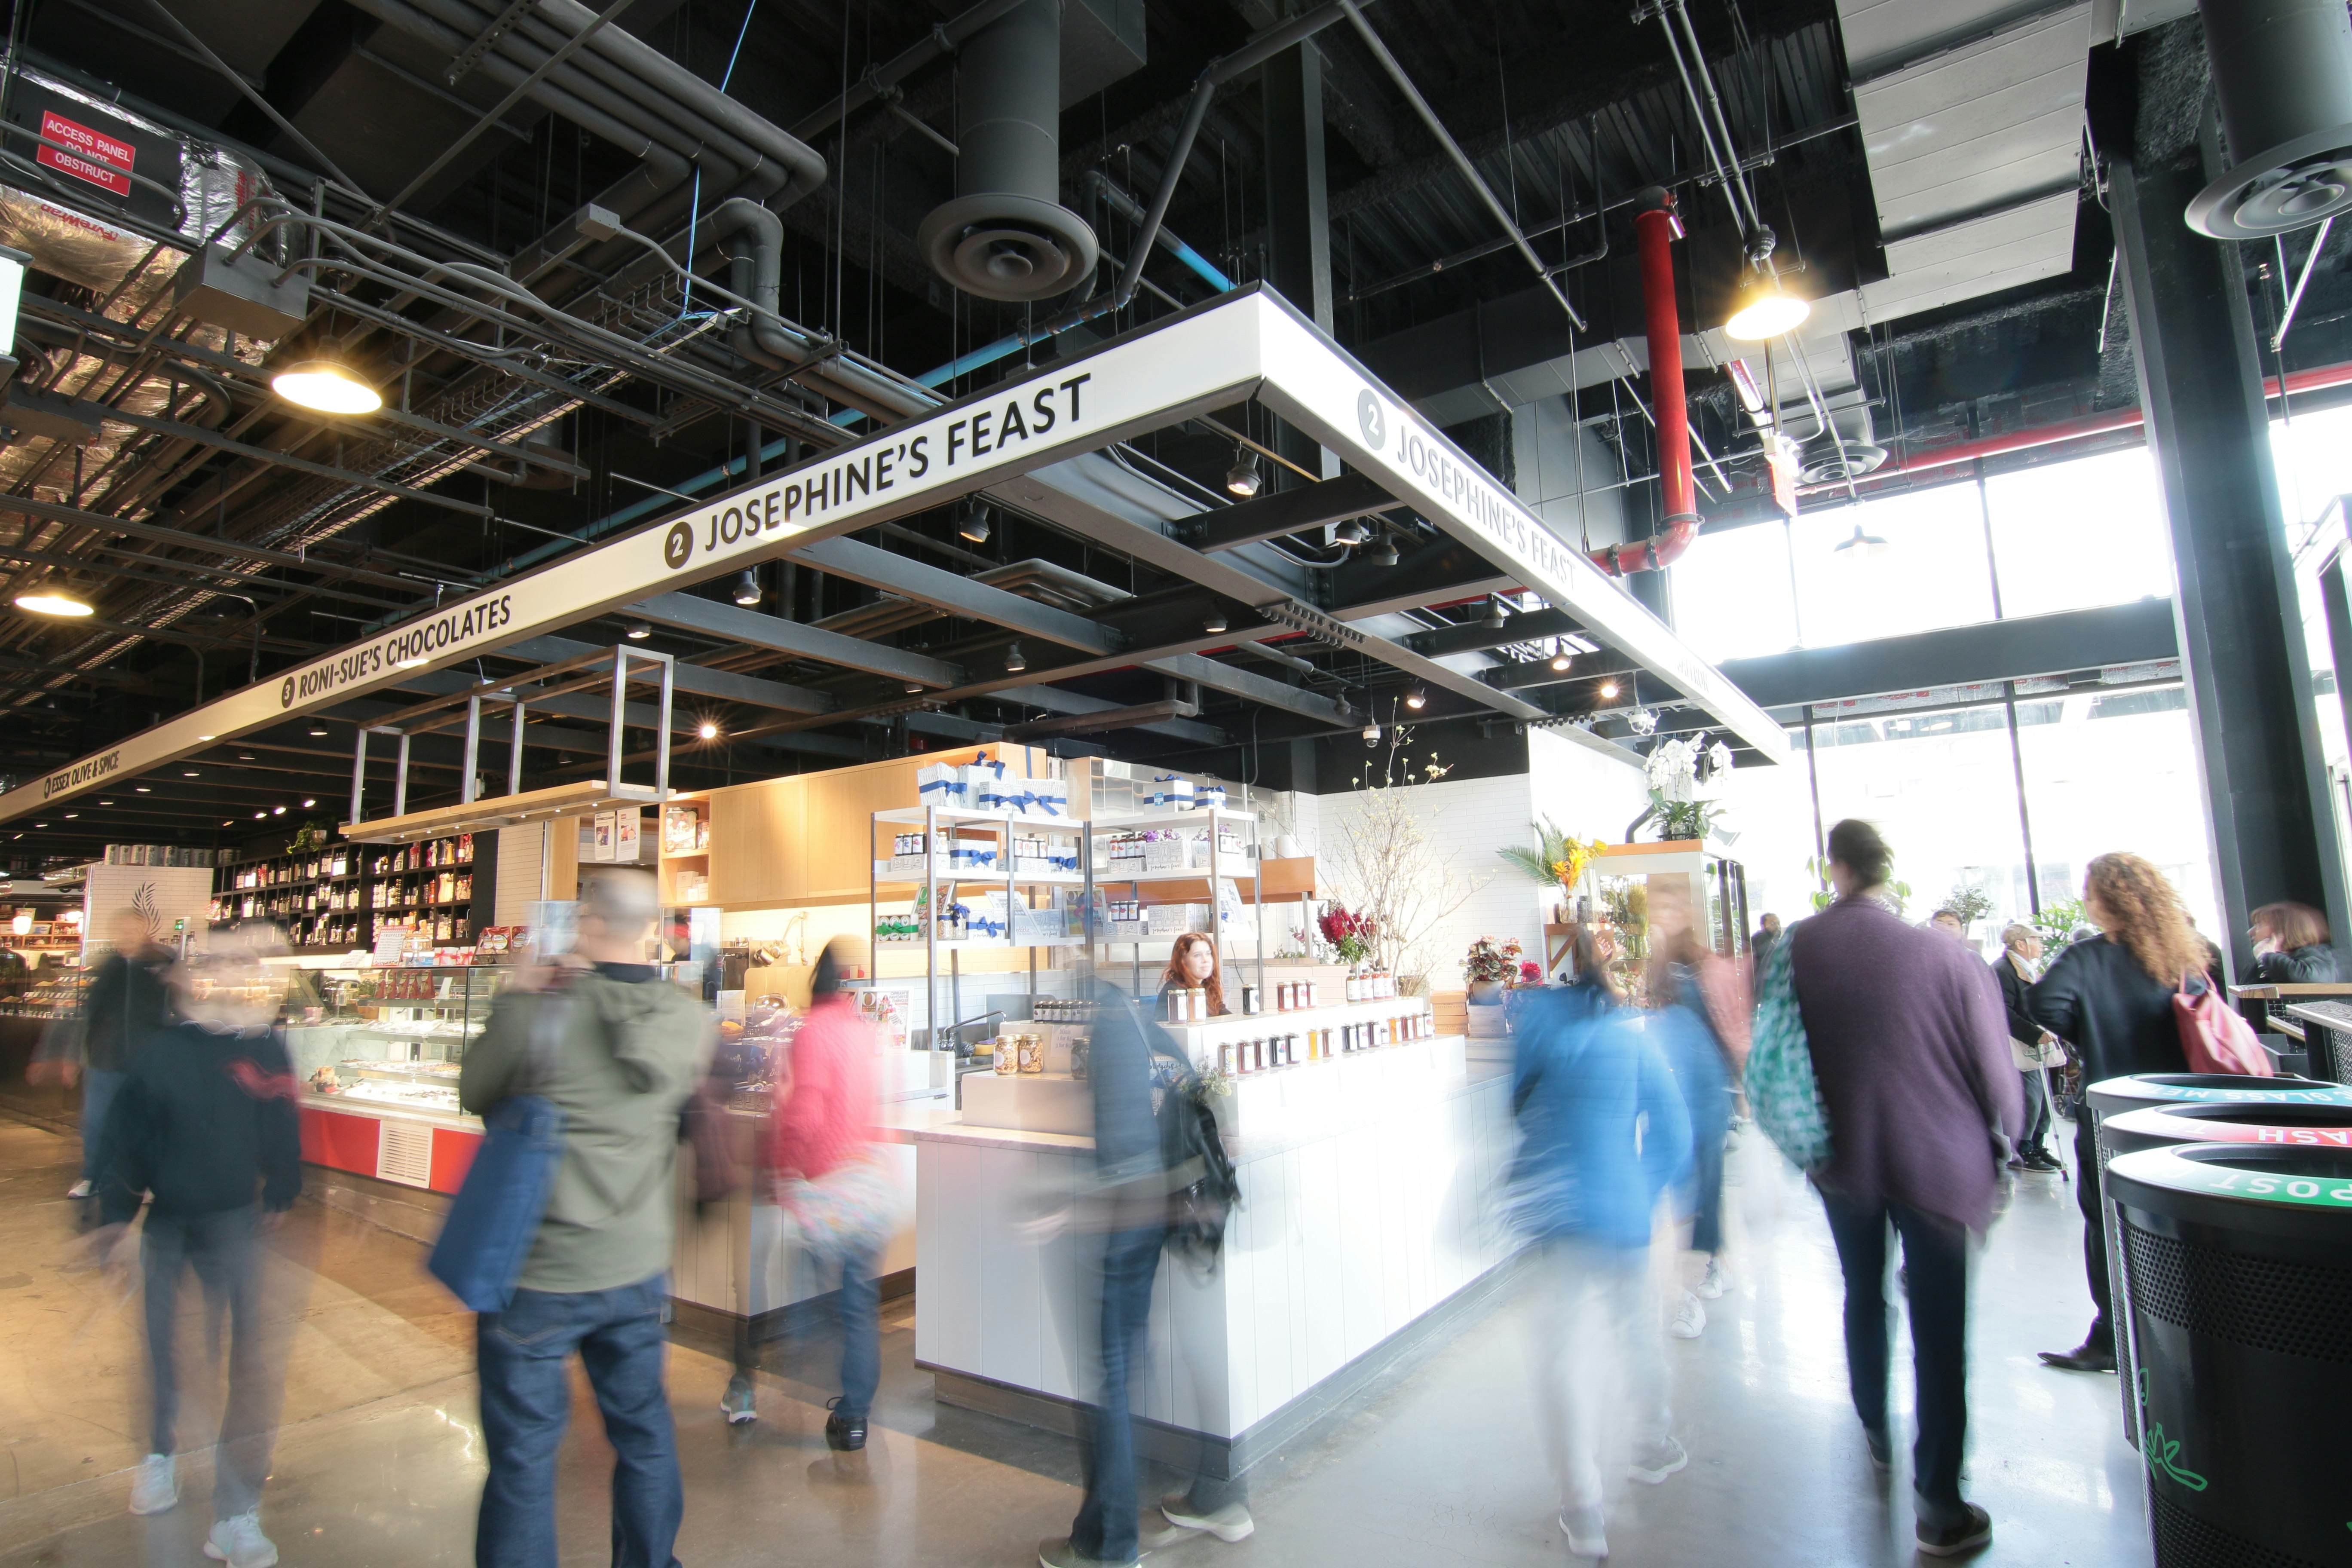 A long exposure of people milling around inside a food hall